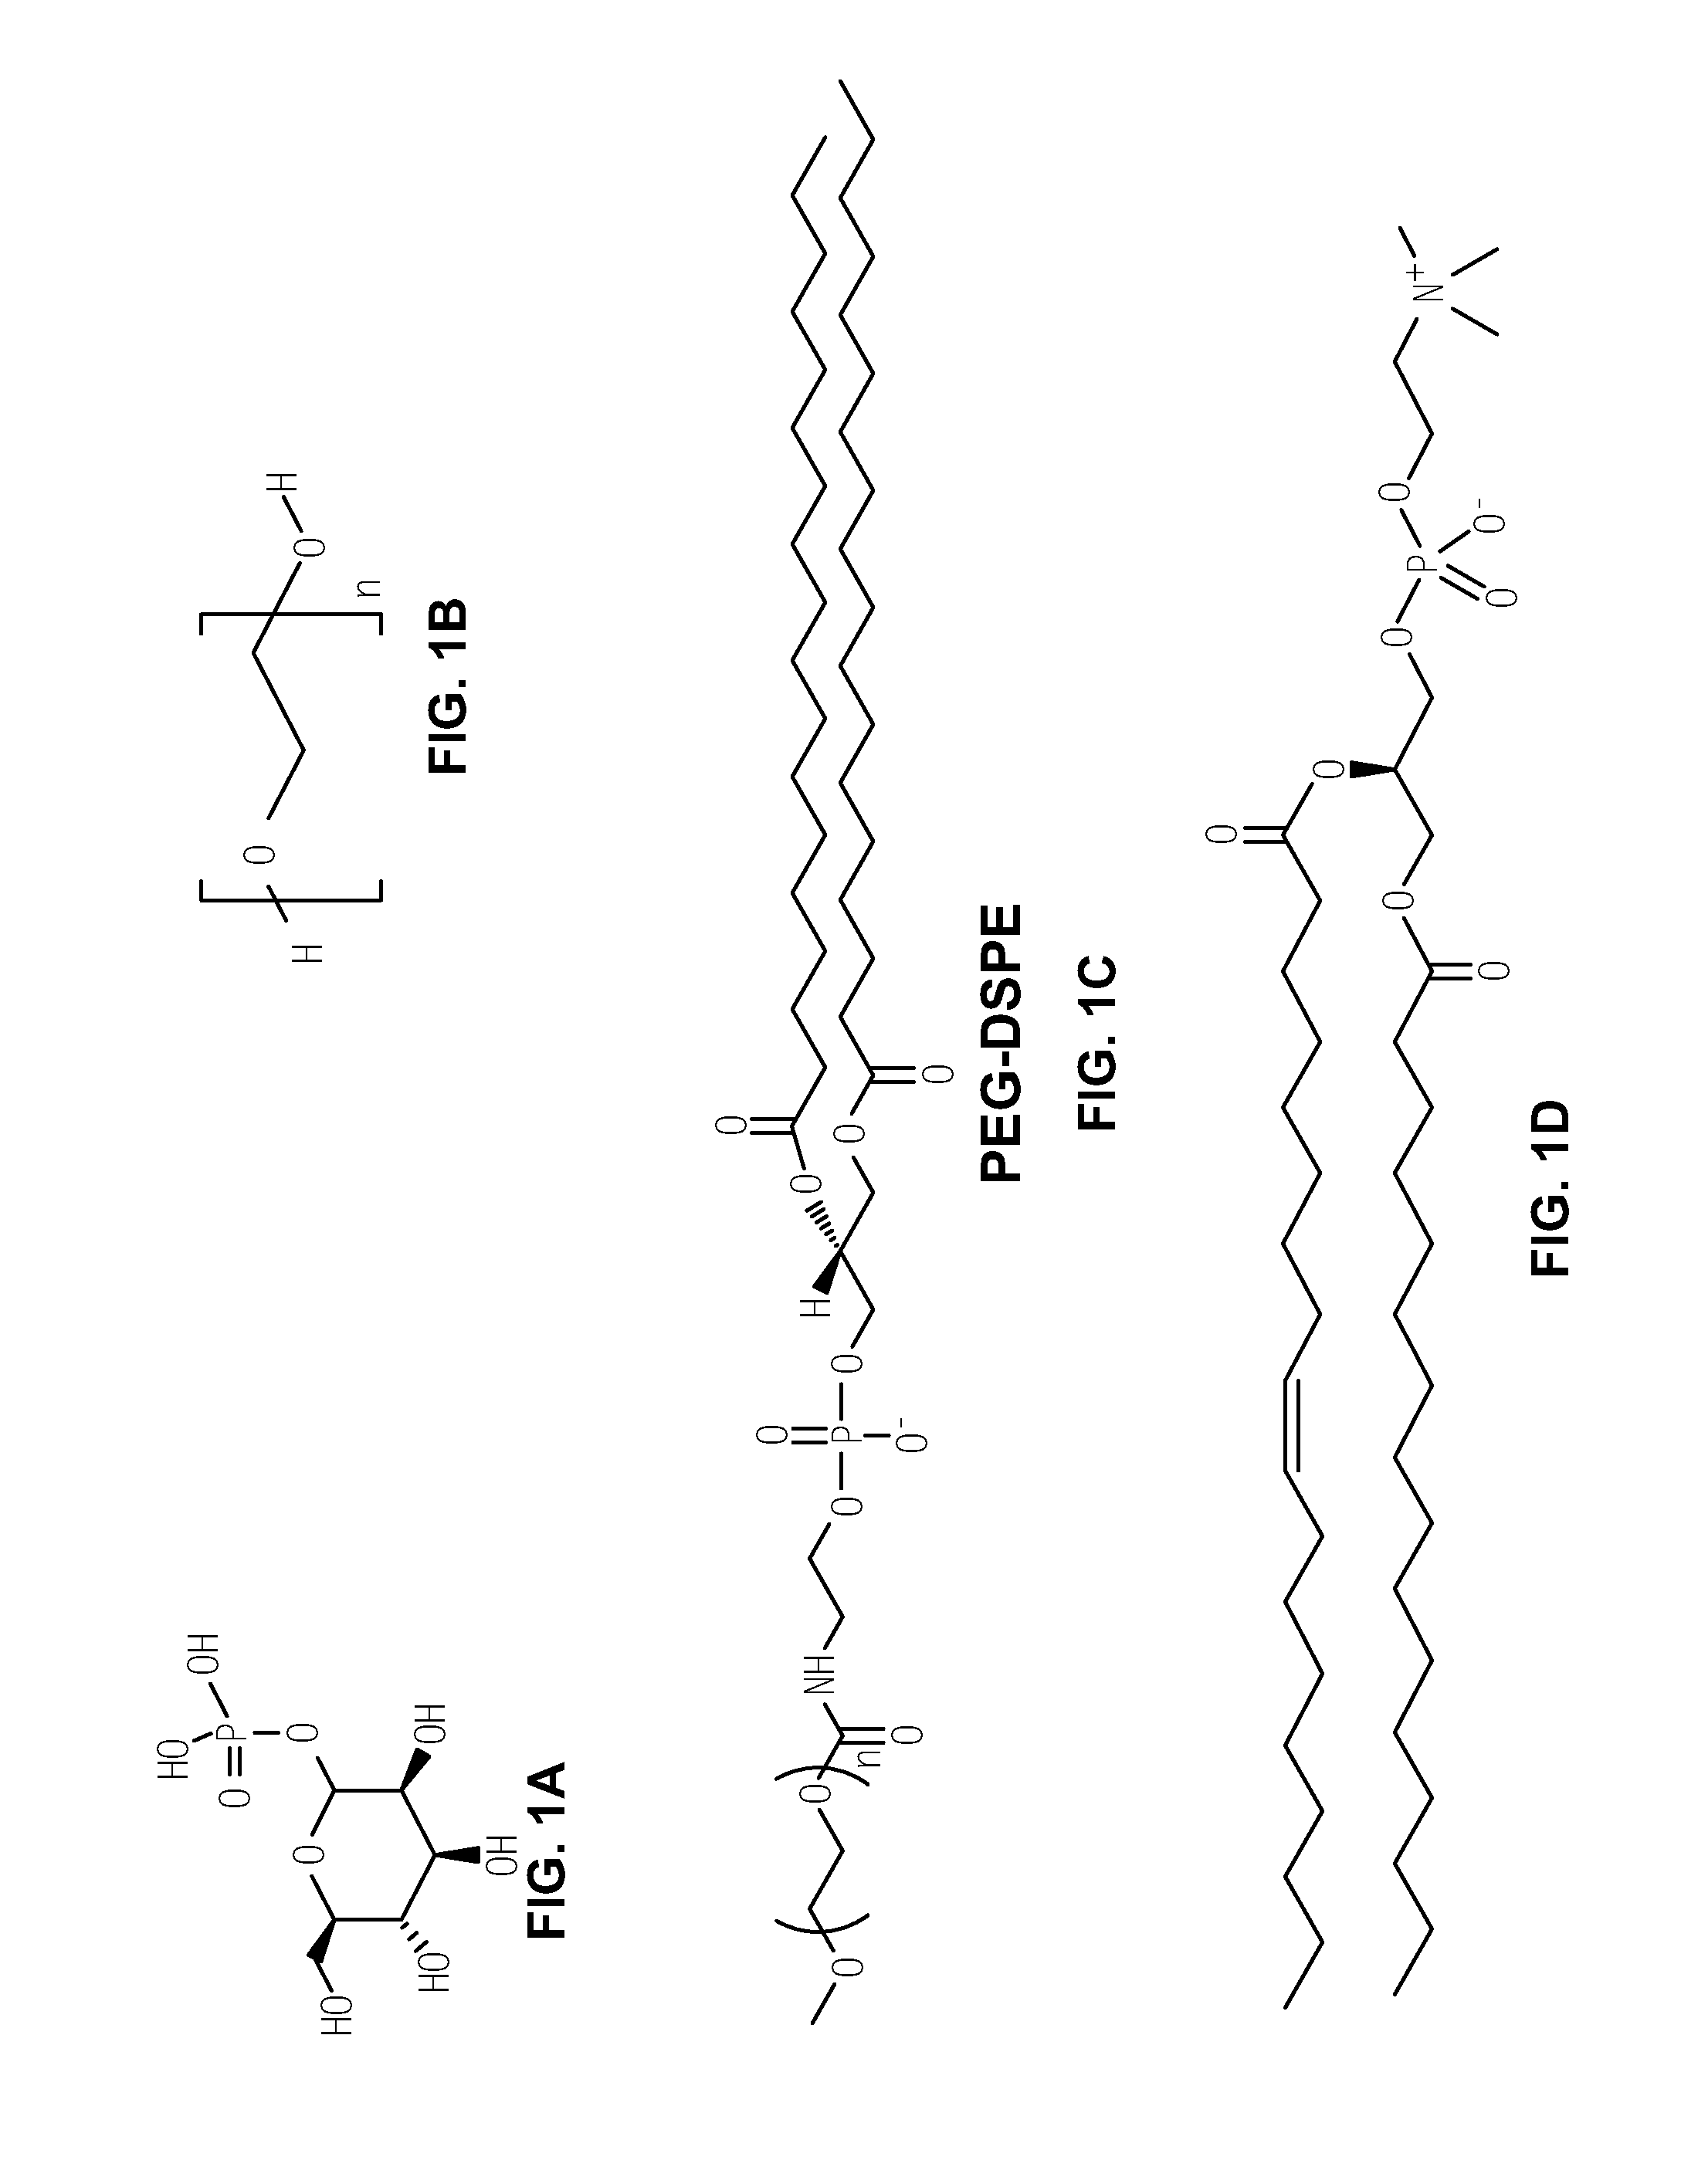 Pharmaceutical preparation of carbohydrates for therapeutic use